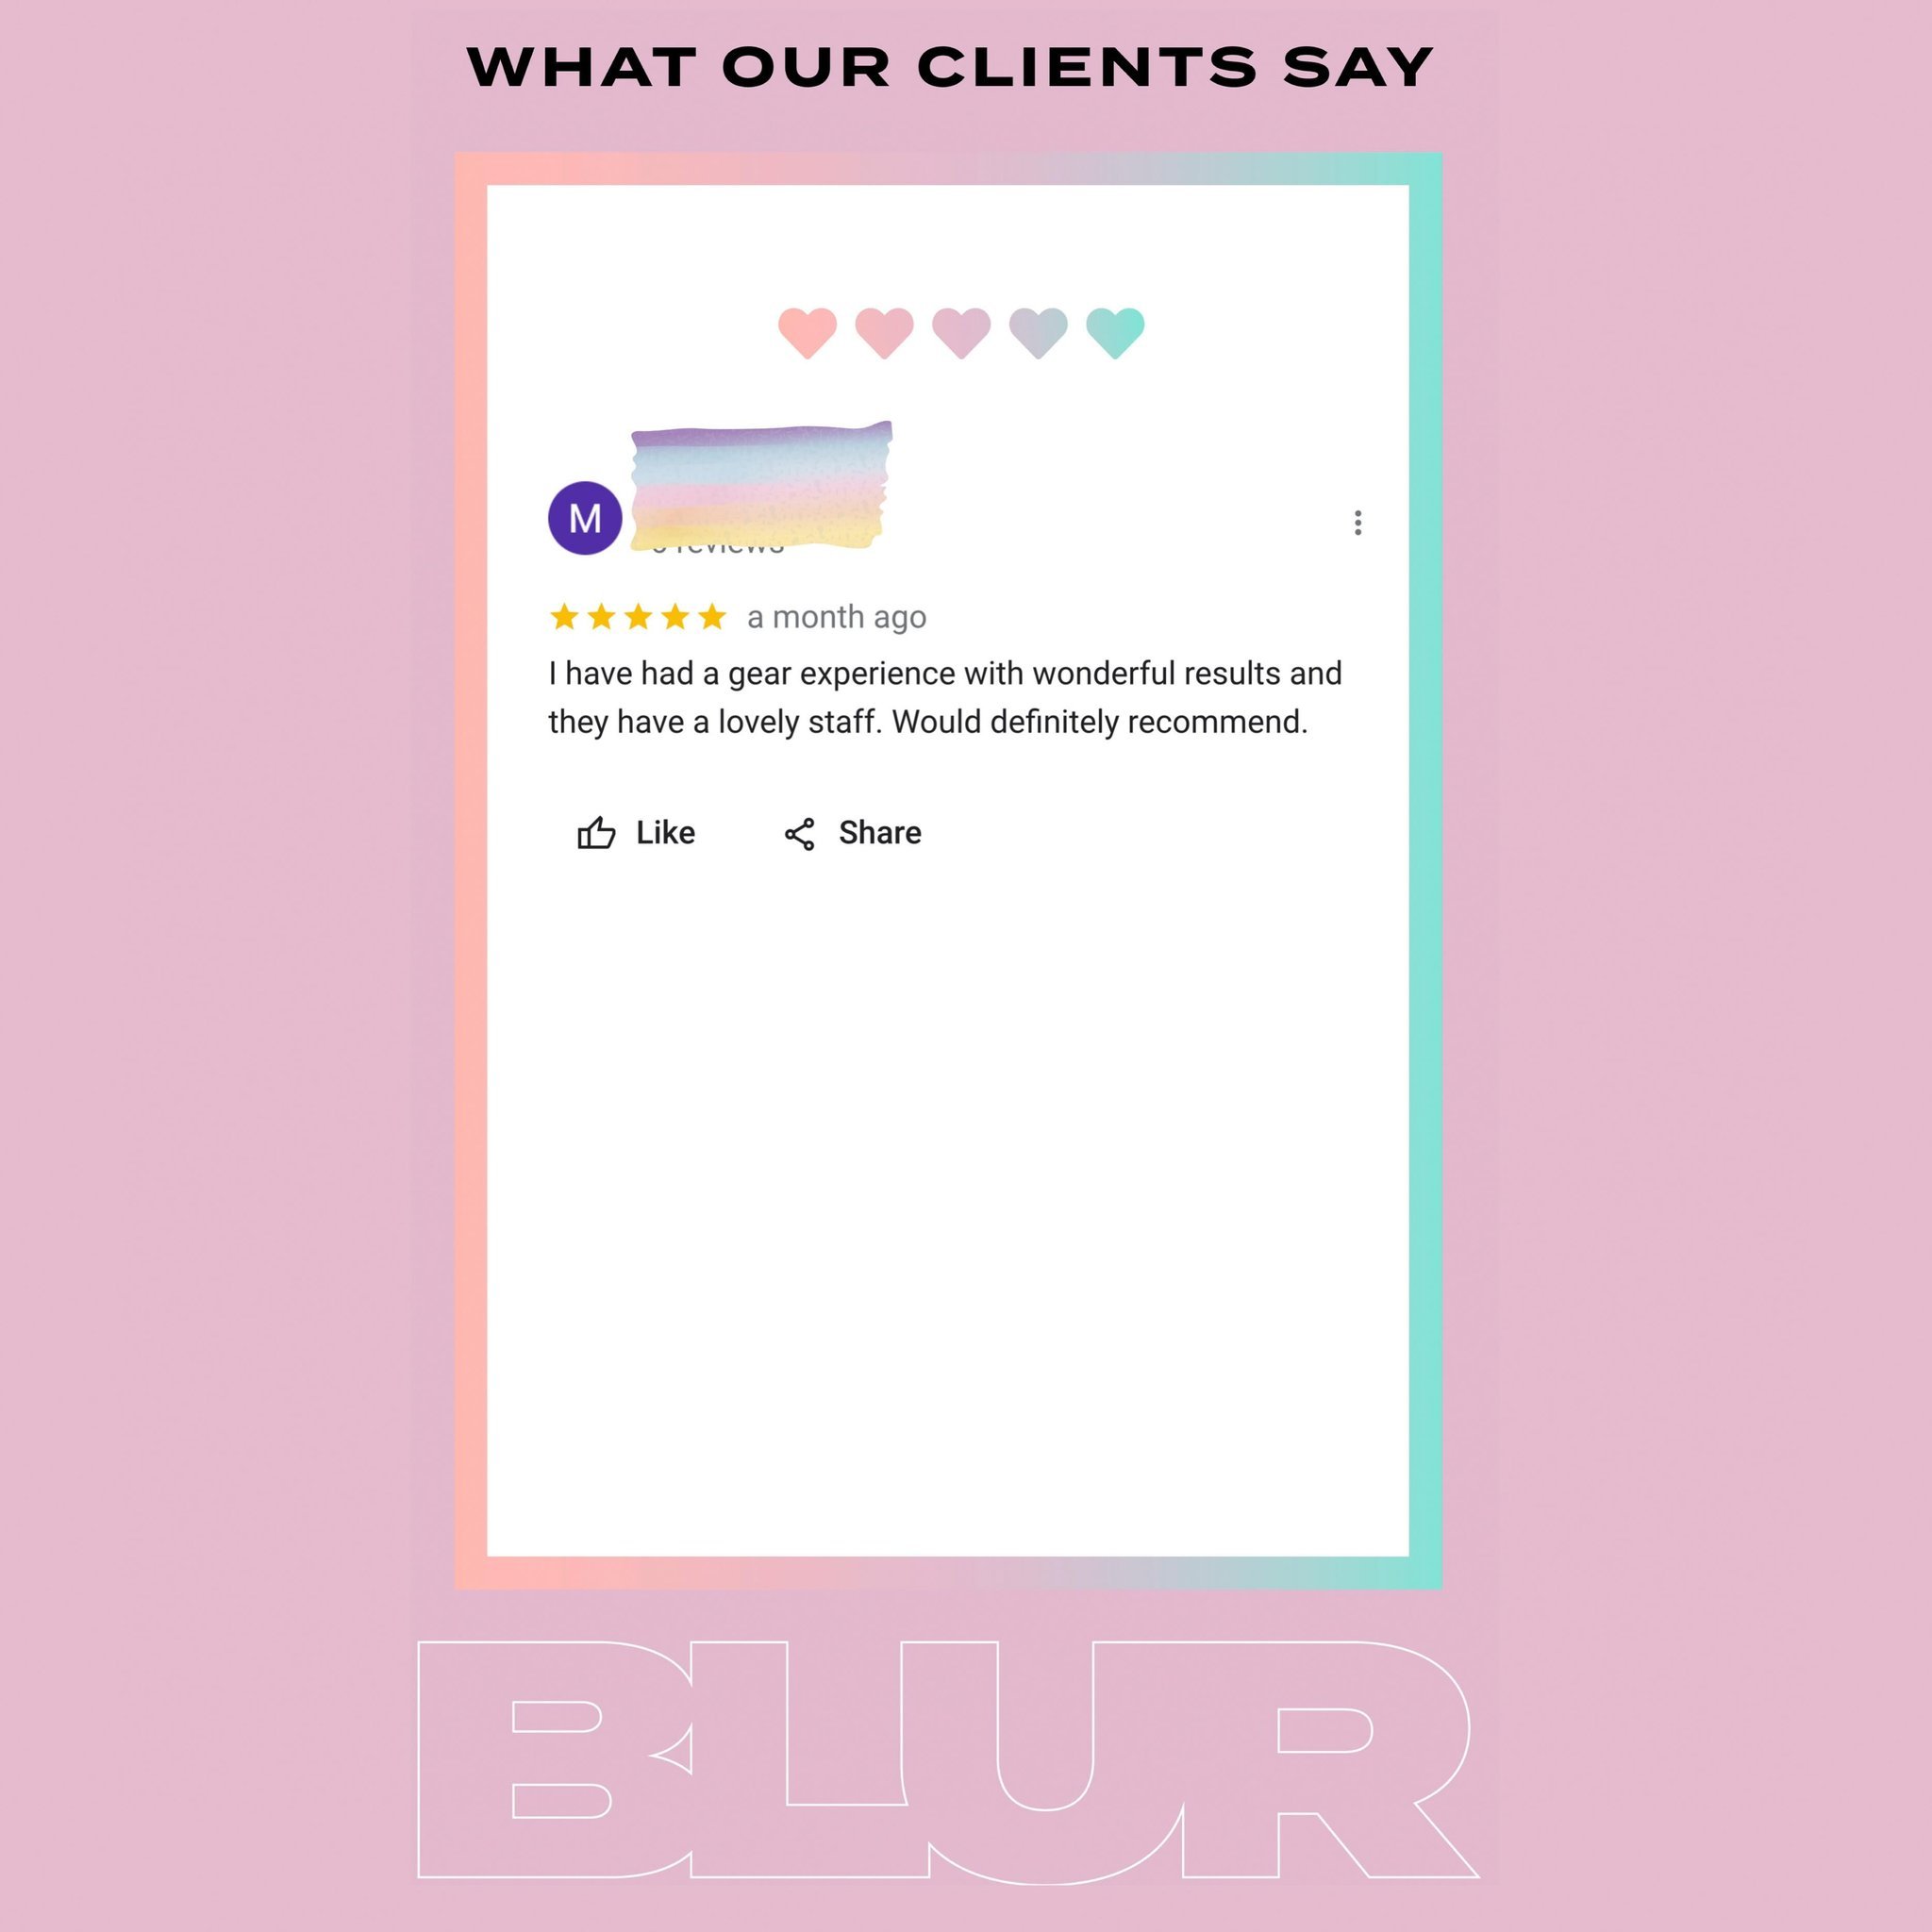 Thank you for another 5 ⭐️ review! Great results, amazing staff, what more can we say?! Come see why we are Miami&rsquo;s top pick for #botox #jeuveau treatments! 🤩

Book online now your FREE consultation or call us at 305-363-3098 📞💖

#miamibotox